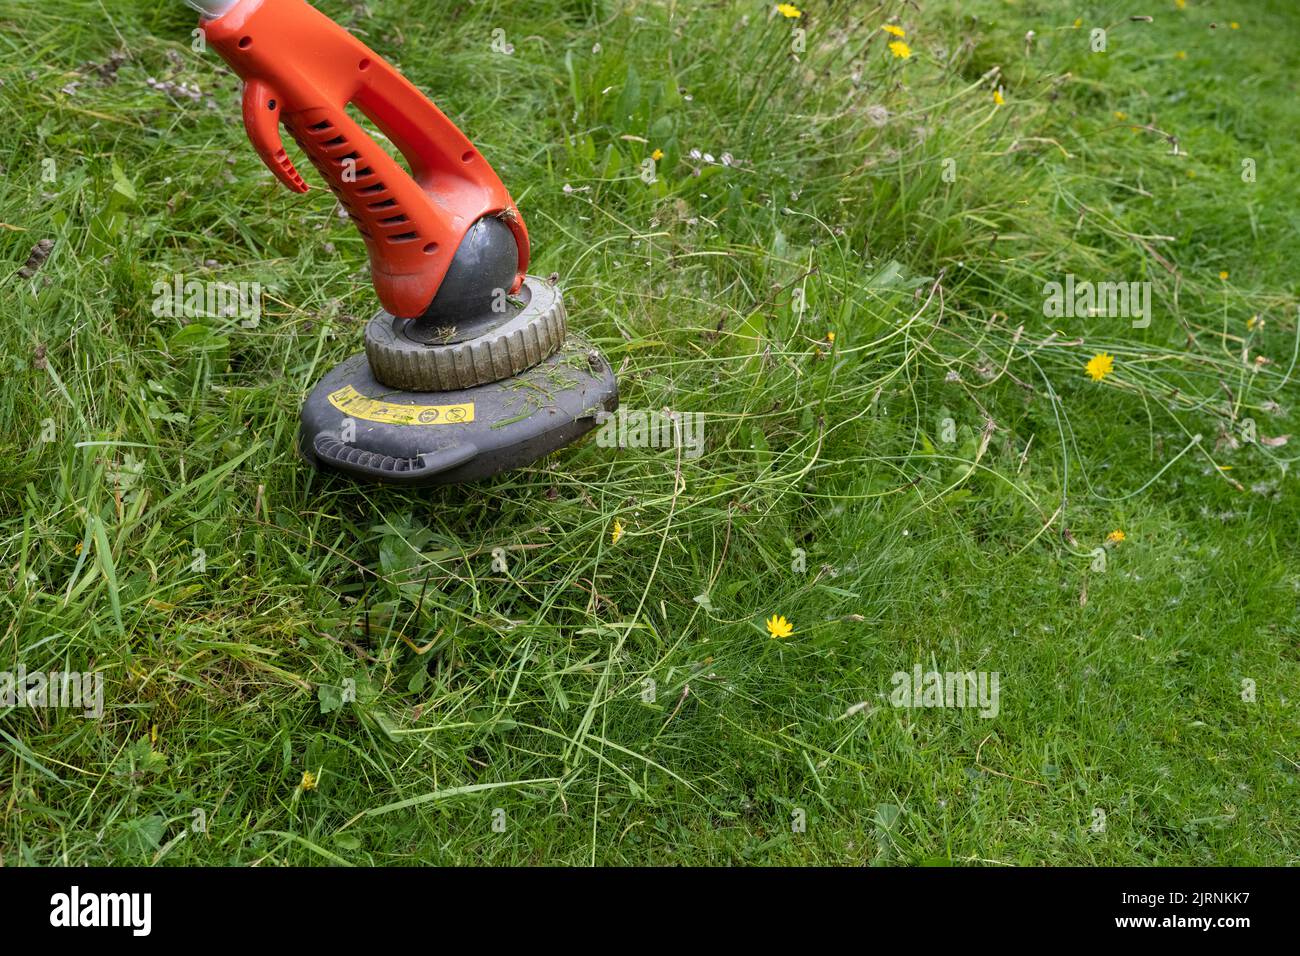 using a strimmer to cut area of lawn that has been allowed to grow long for wildlife - UK Stock Photo